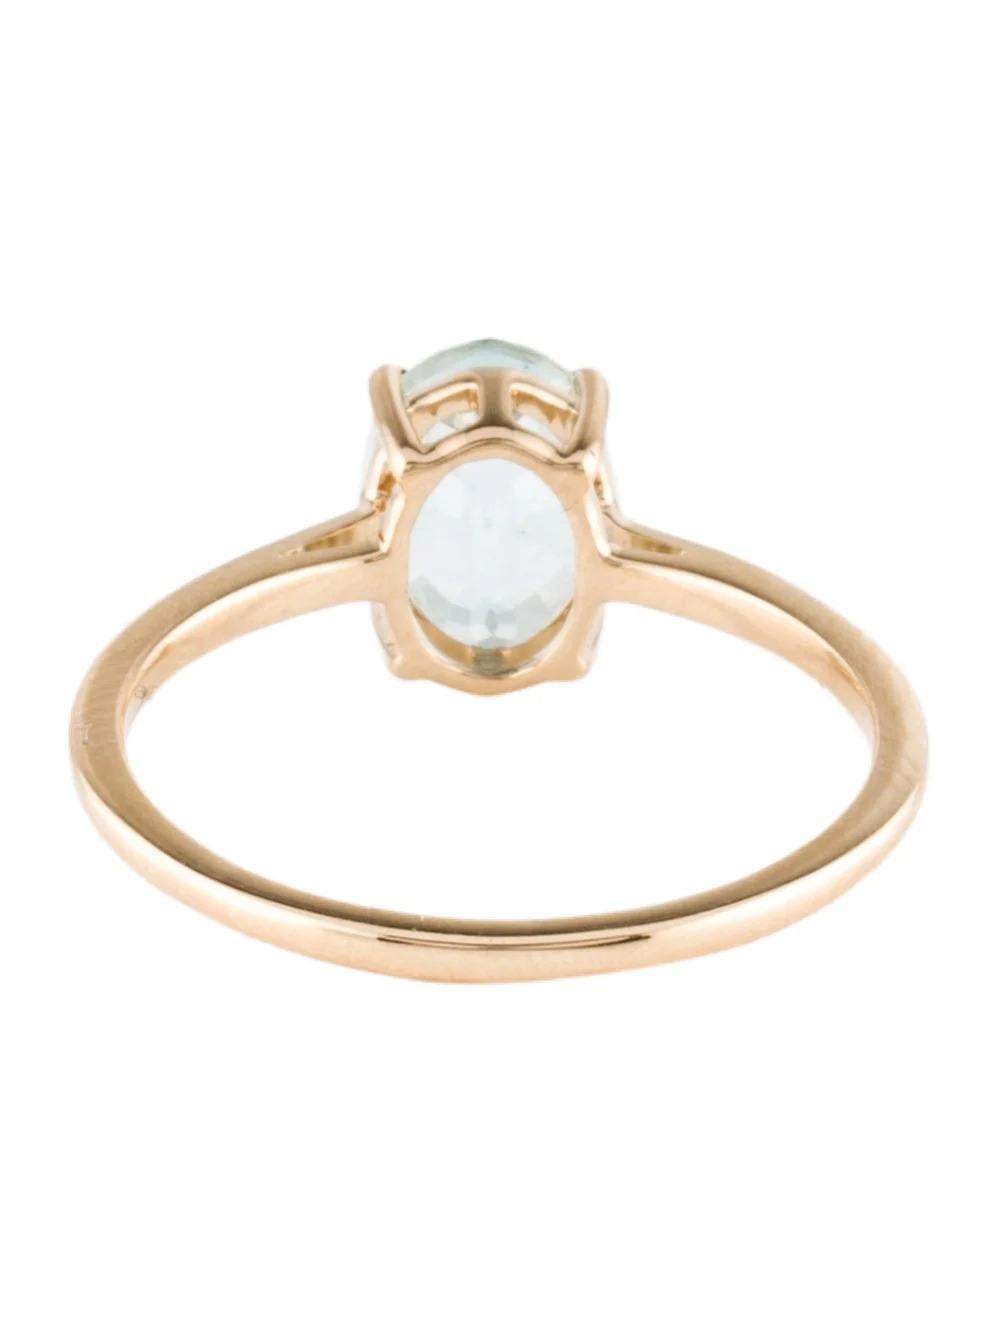 14K Aquamarine Cocktail Ring, Size 6.75 - Blue Gemstone, Elegant Design In New Condition For Sale In Holtsville, NY